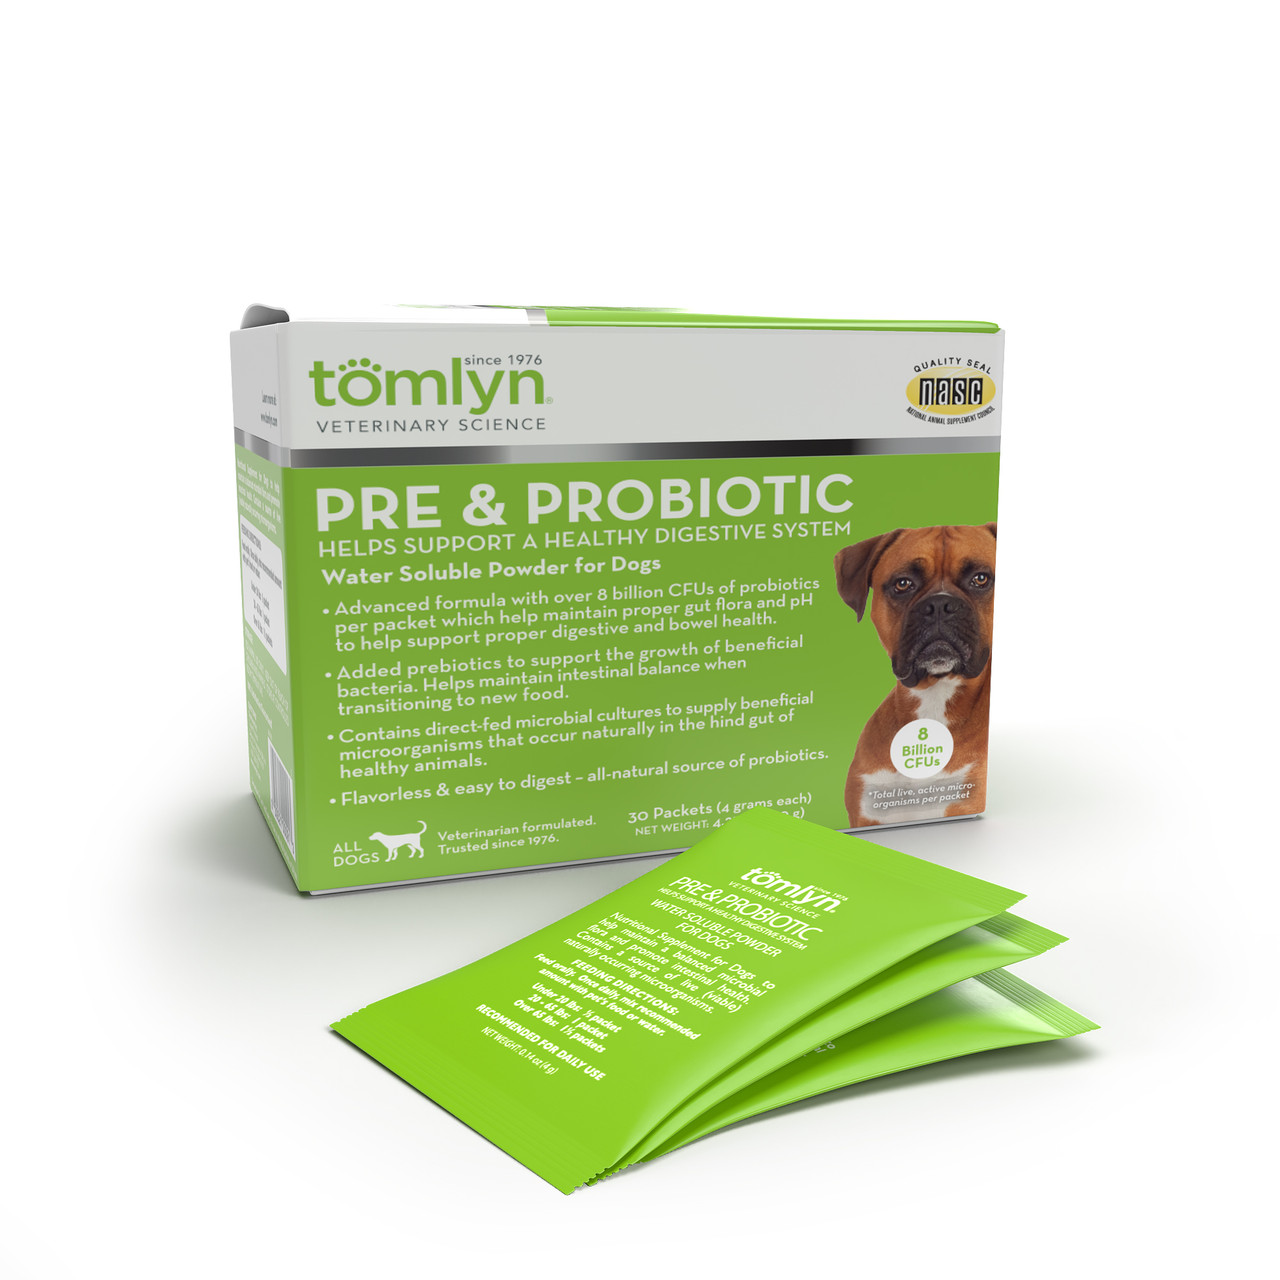 what is the best probiotic supplement for dogs